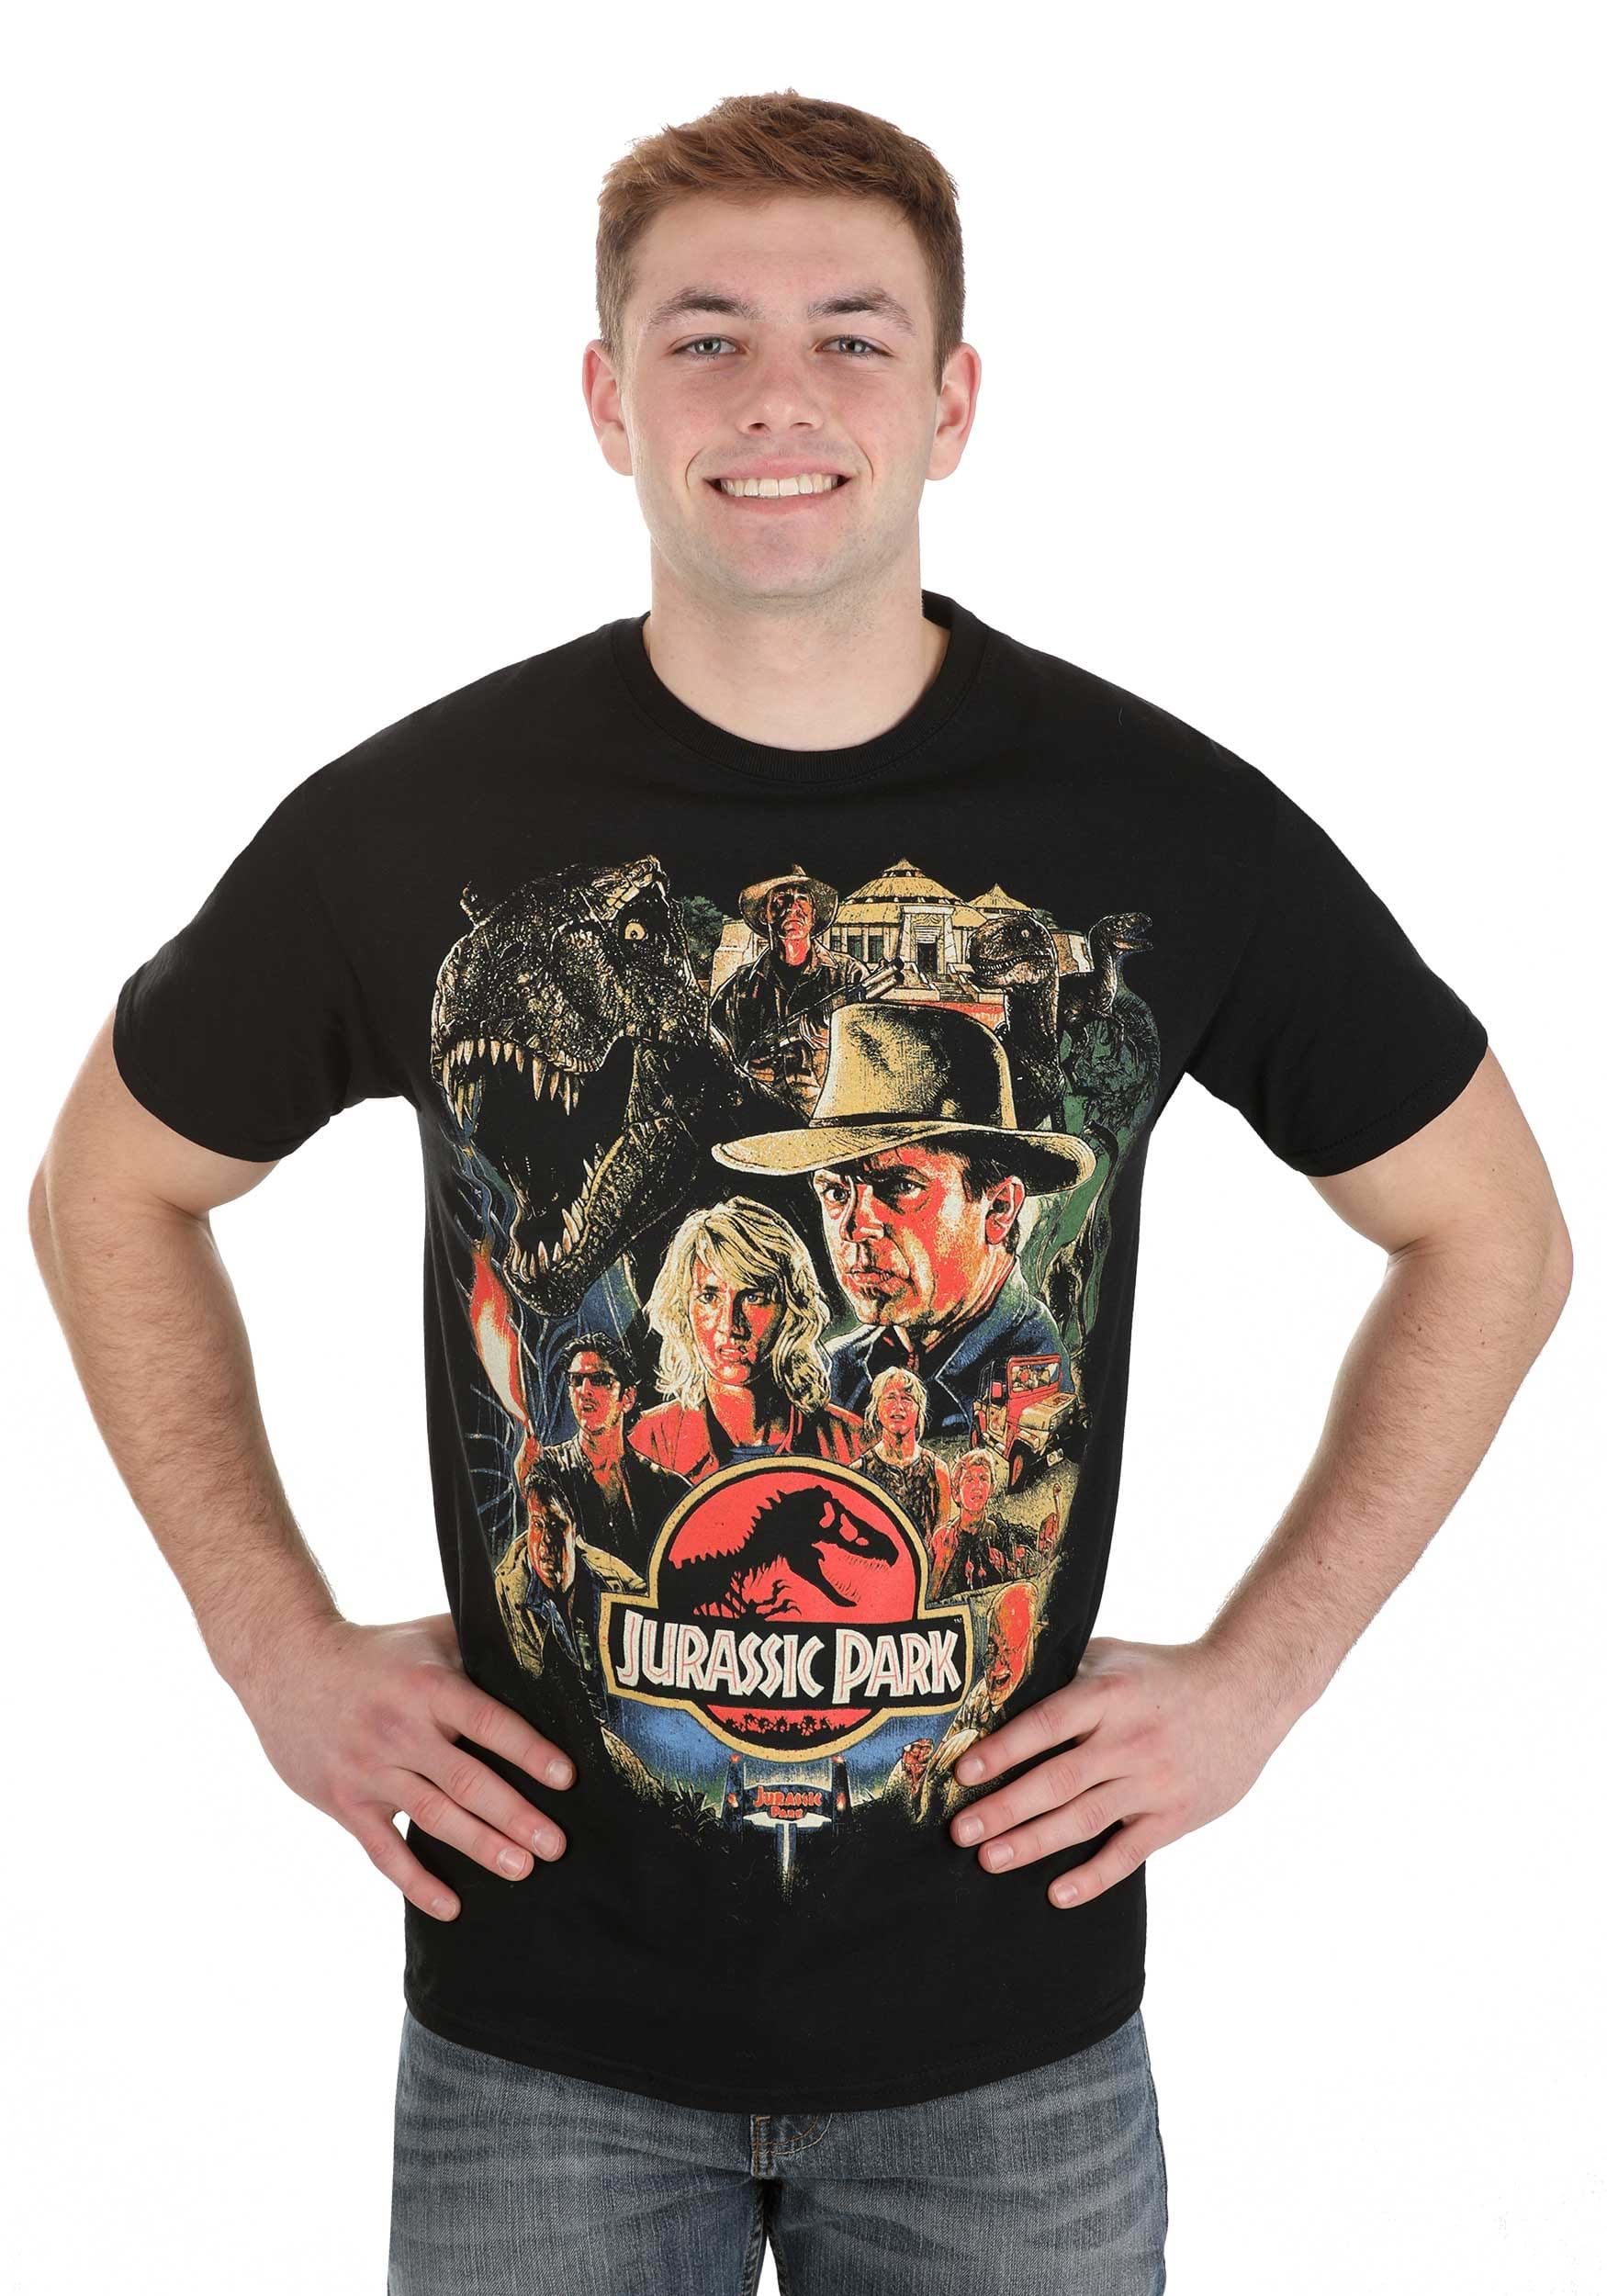 https://images.fun.com/products/90361/1-1/adult-classic-jurassic-park-poster-shirt.jpg